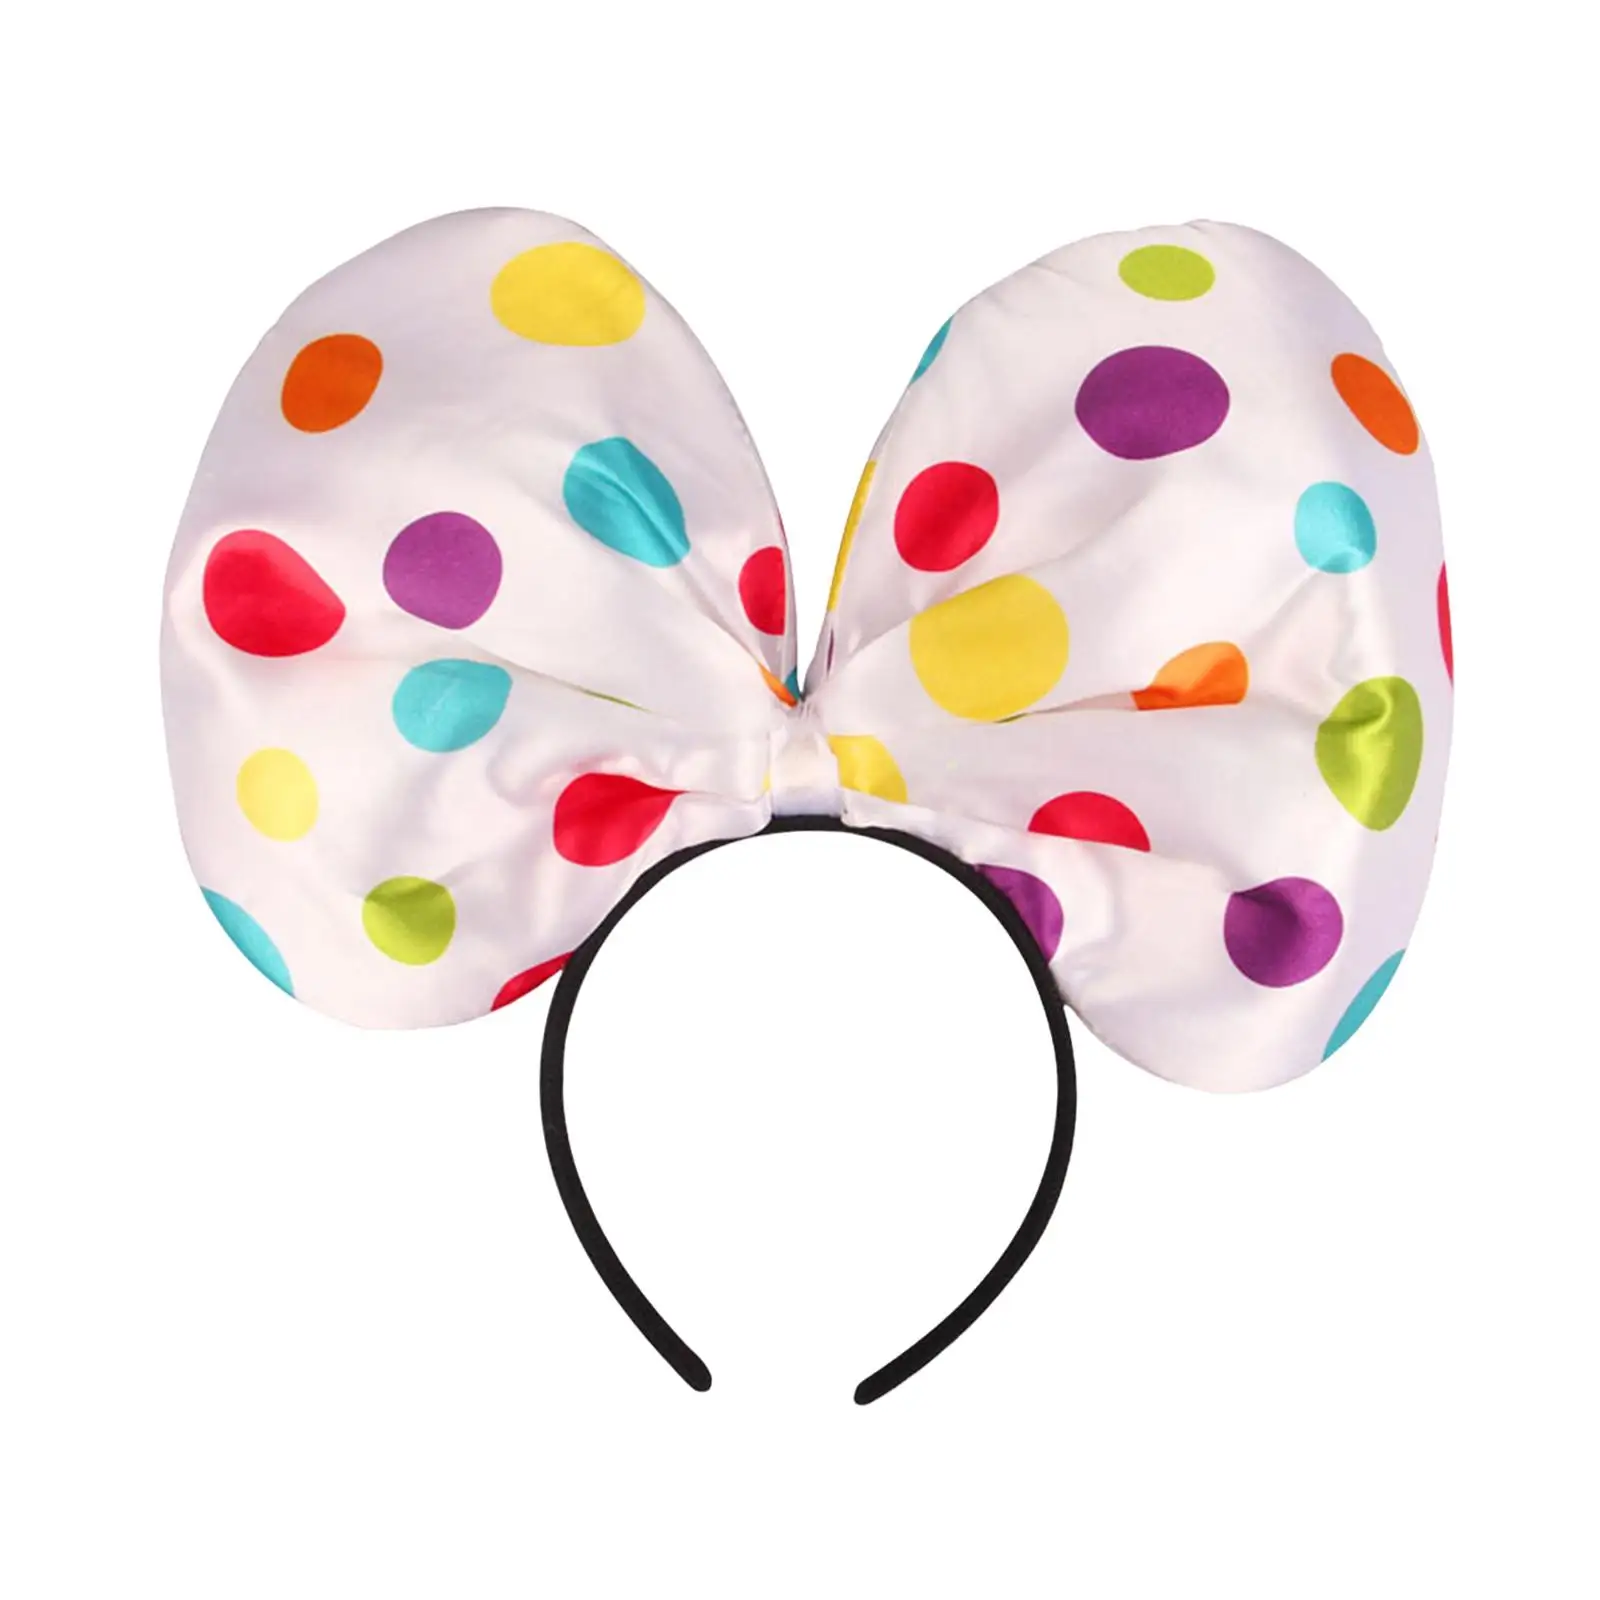 Clown Headband Women Decor Hair Accessories Adults Photo Props Hair Hoop for Birthday Party Performance Carnival Role Play